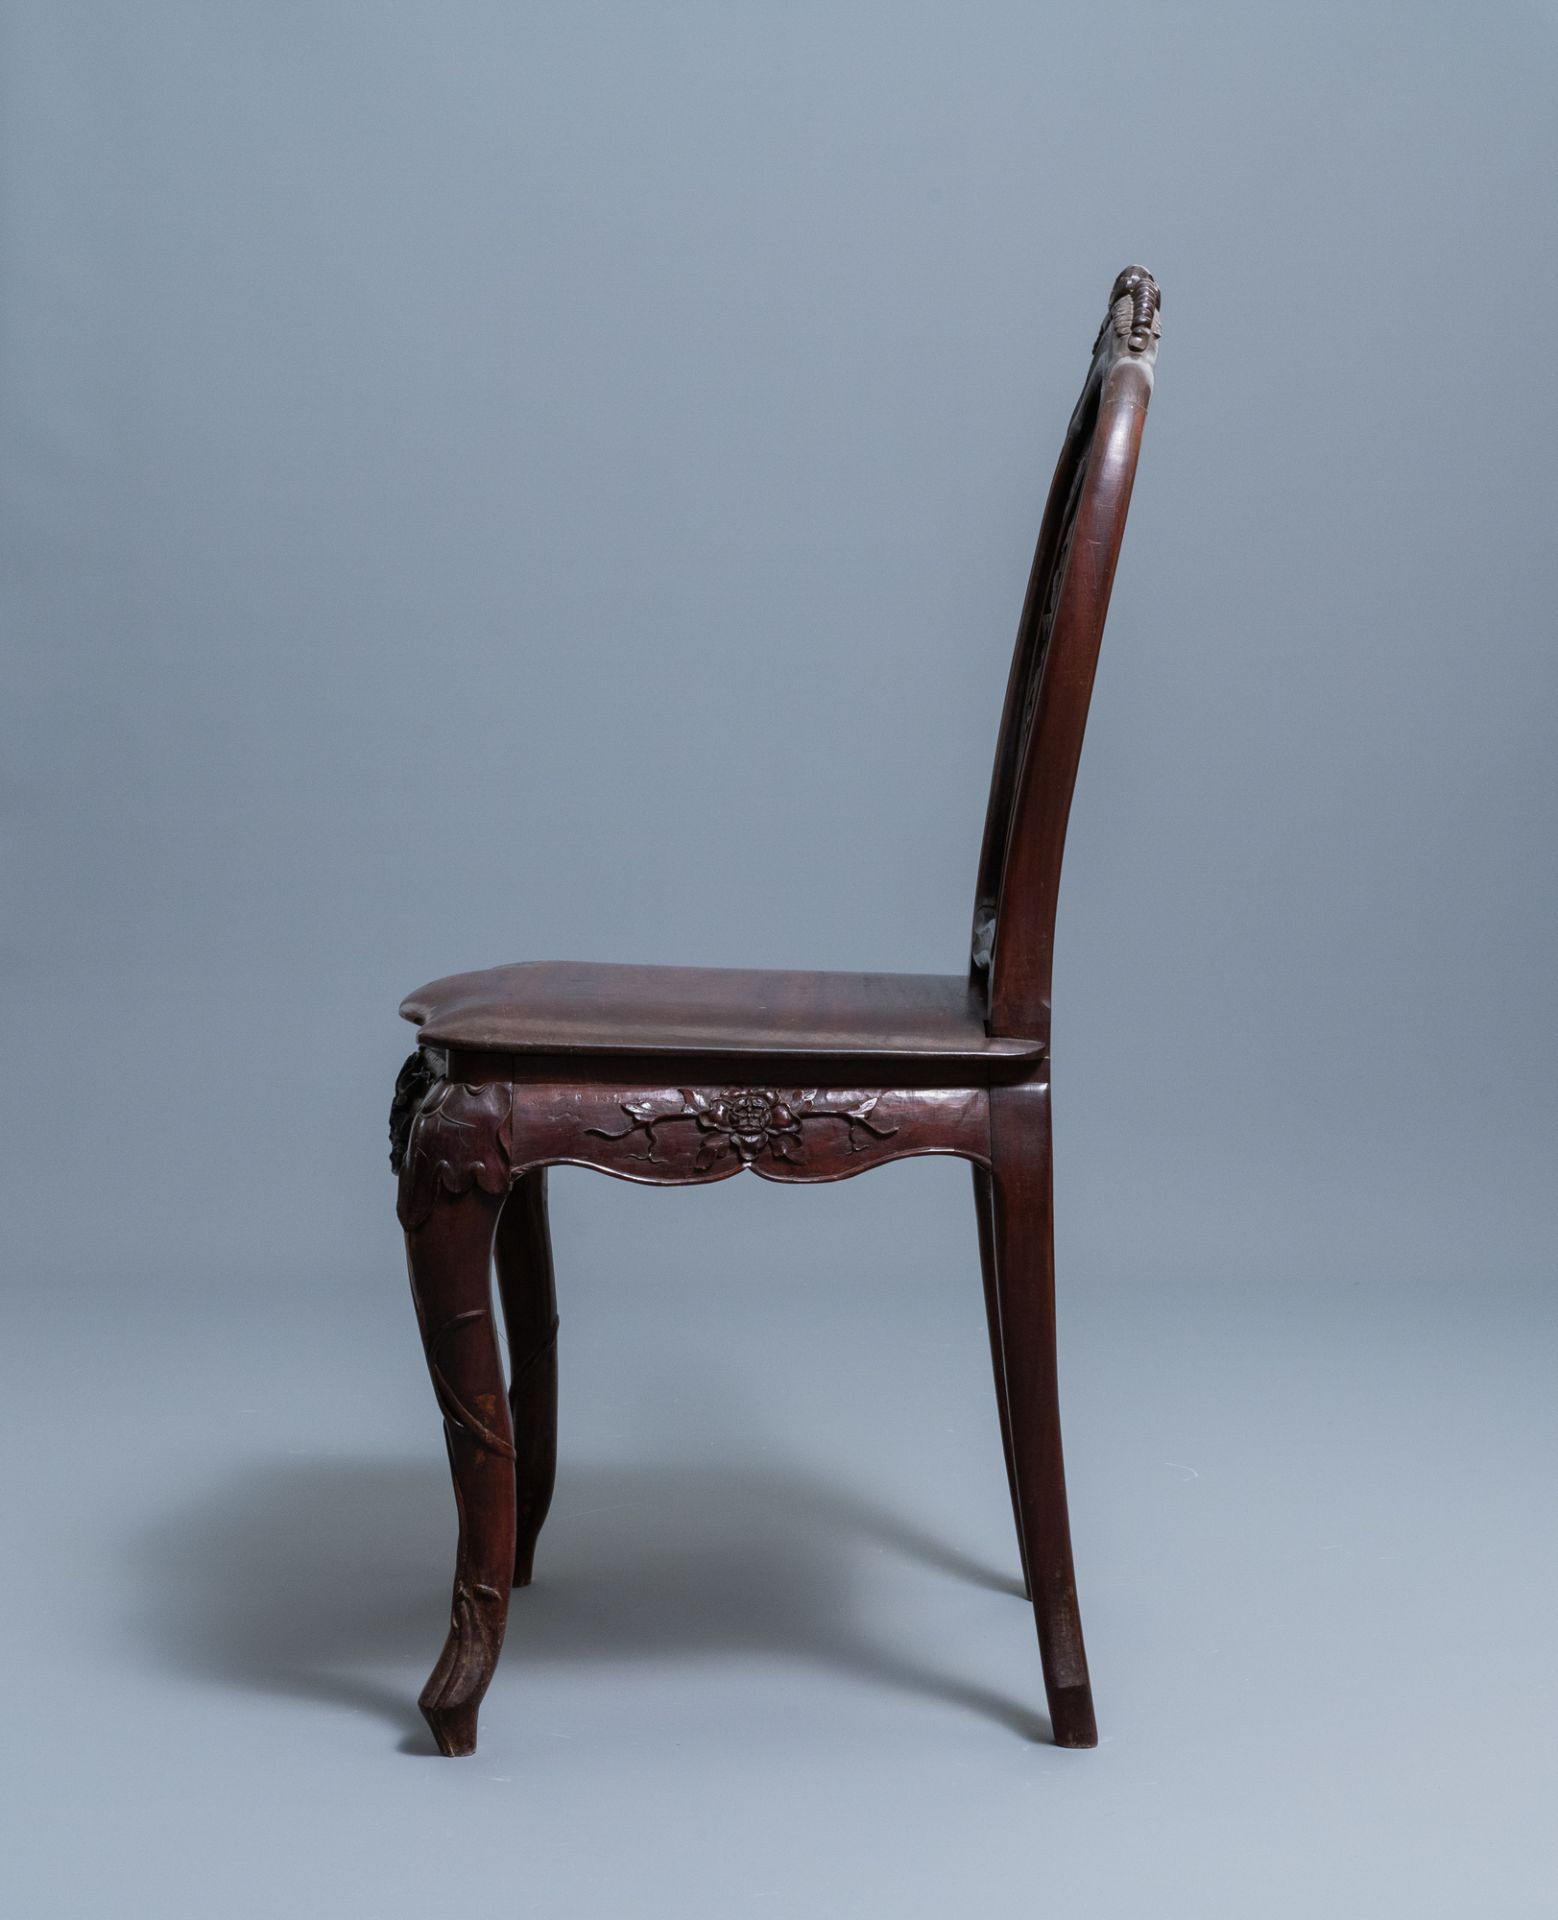 Four wooden chairs with reticulated backs, Macao or Portuguese colonial, 19th C. - Image 27 of 47